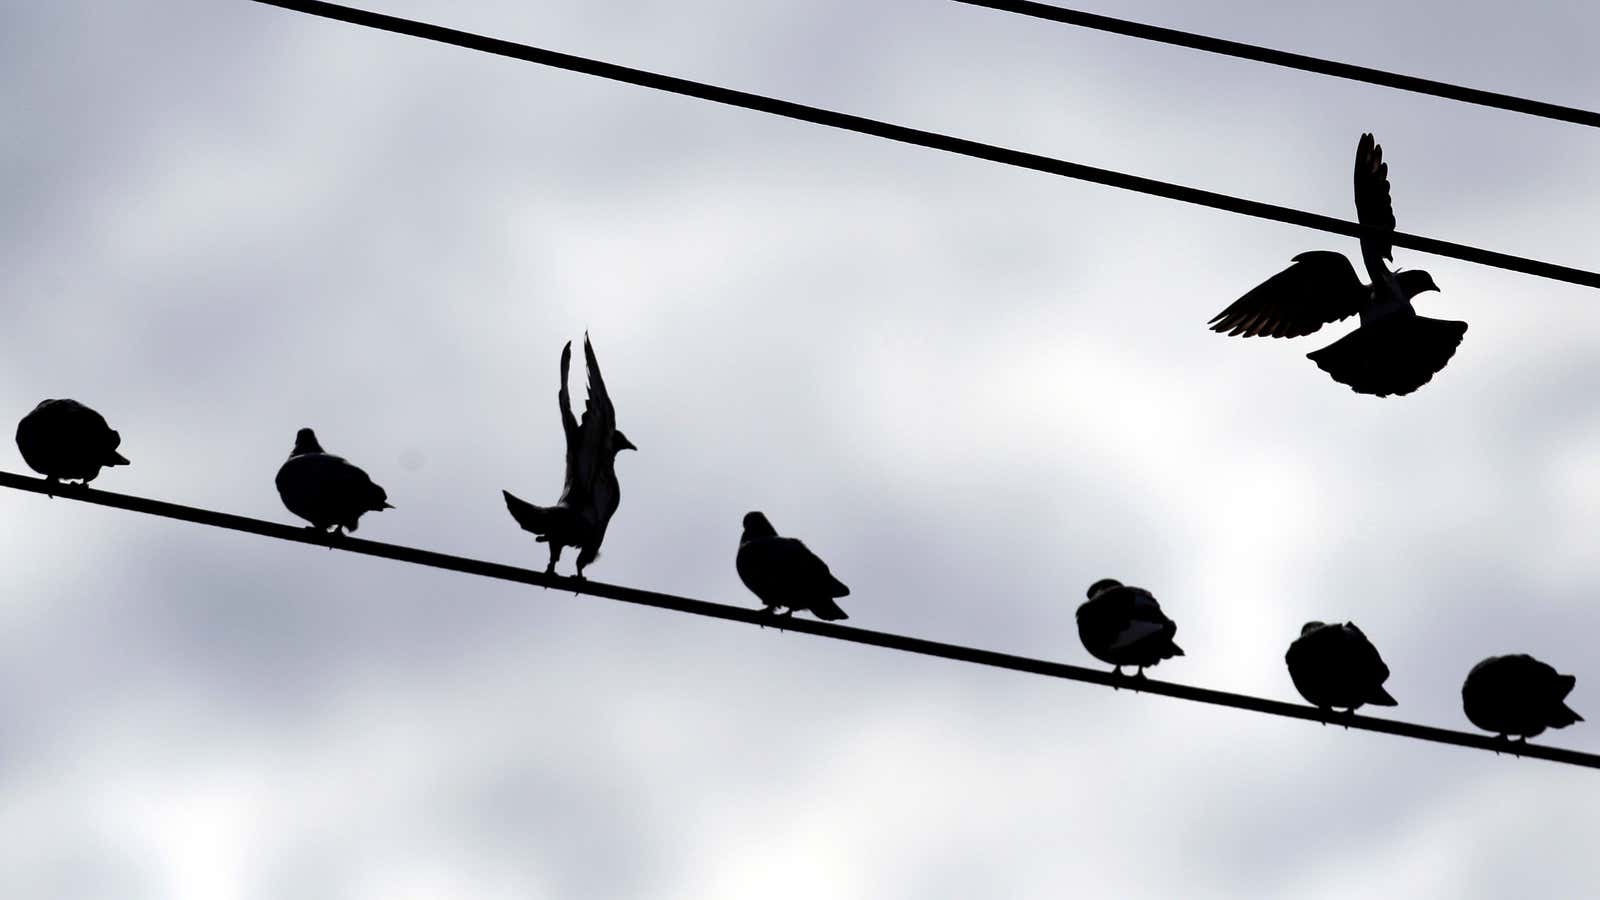 Nobody wants to be the first bird off the wire.